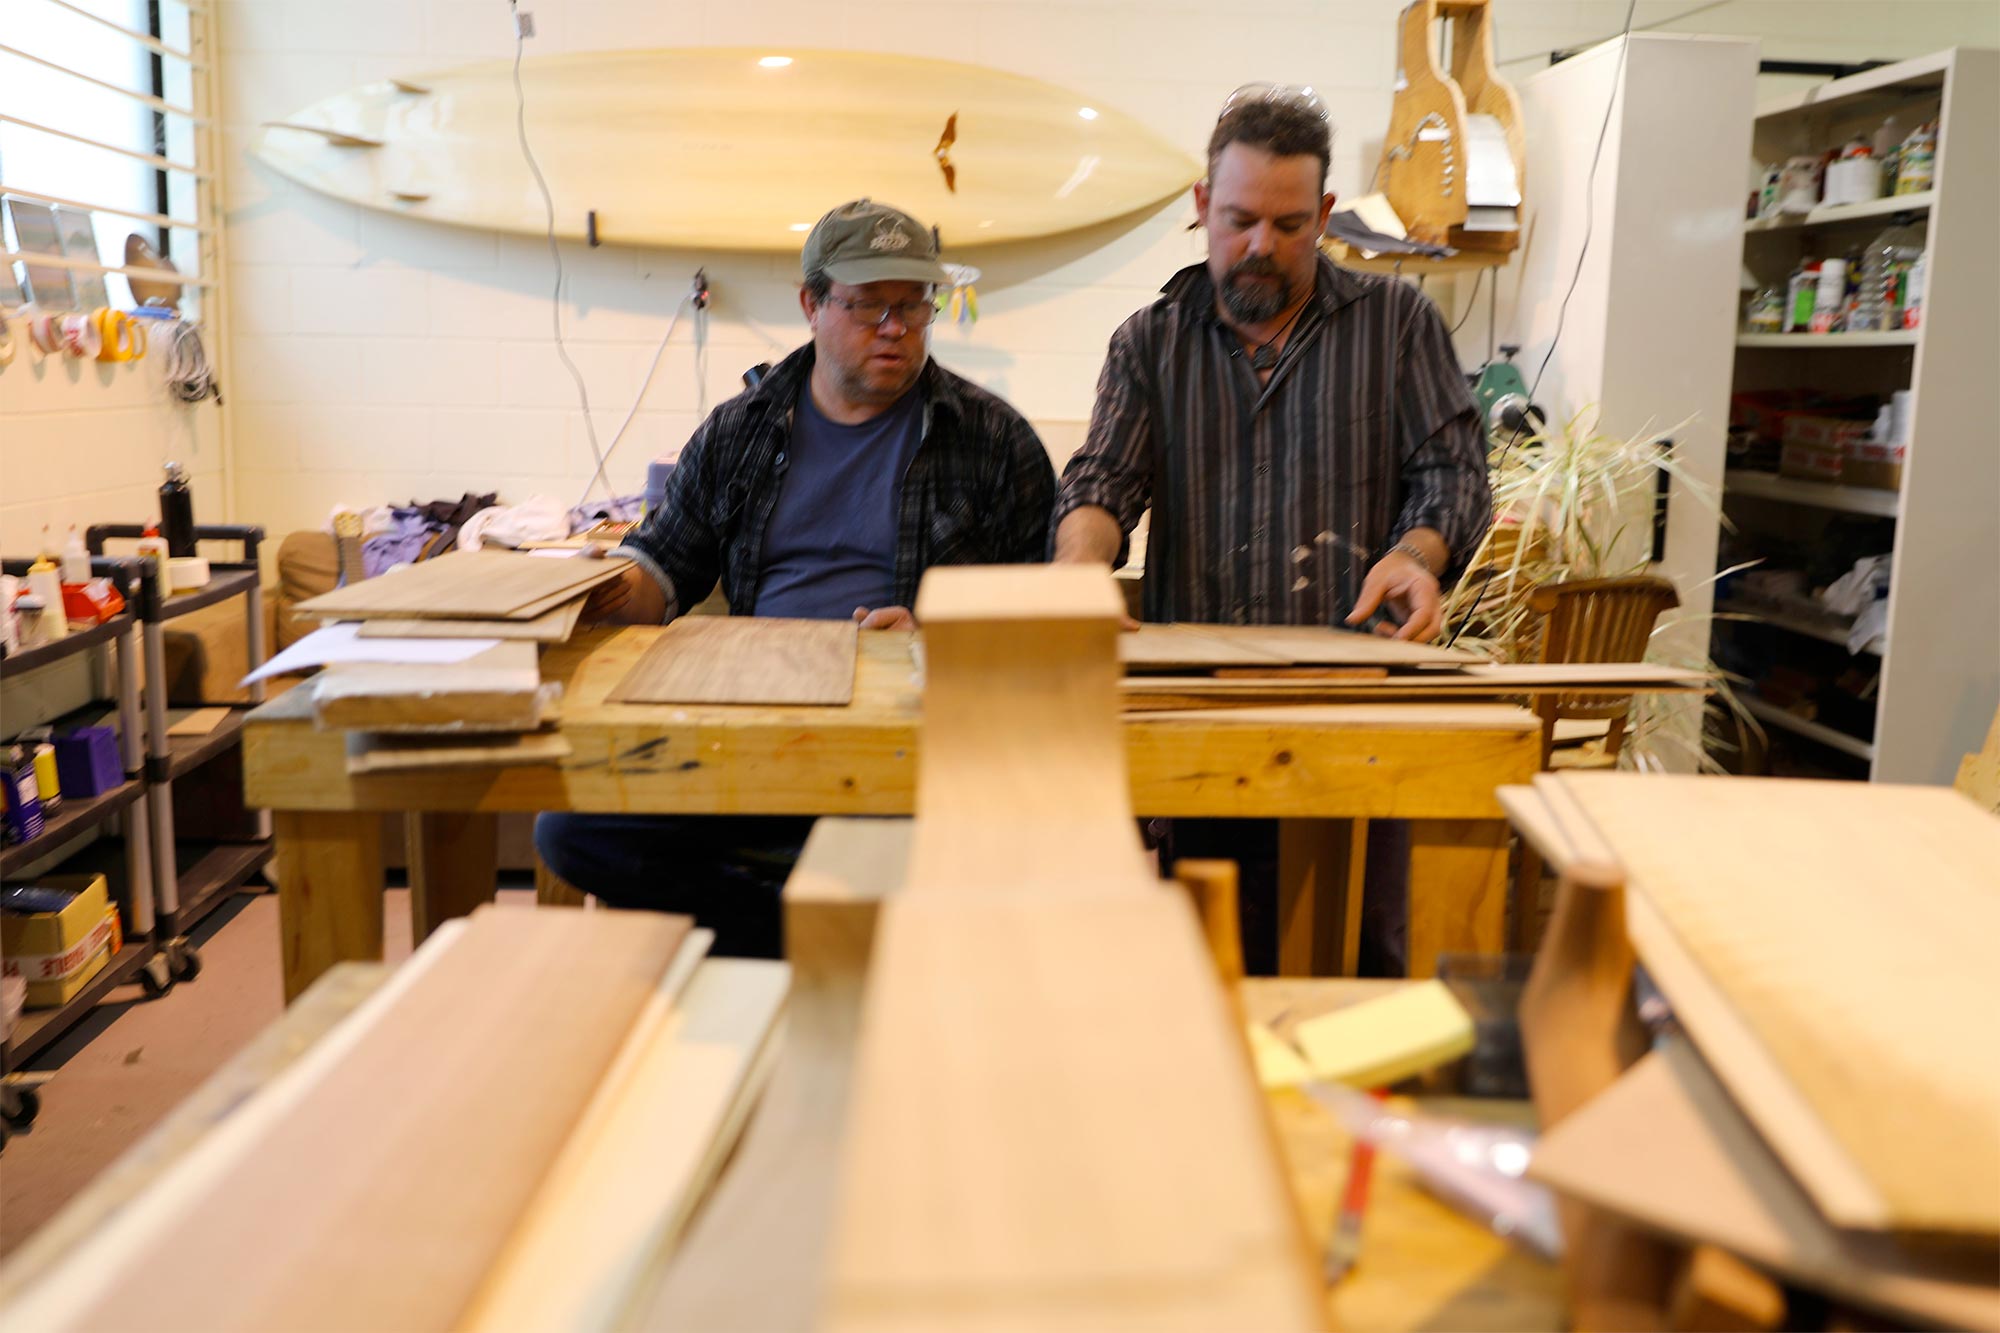 Brothers Bear and Ryan starting their guitar making journey